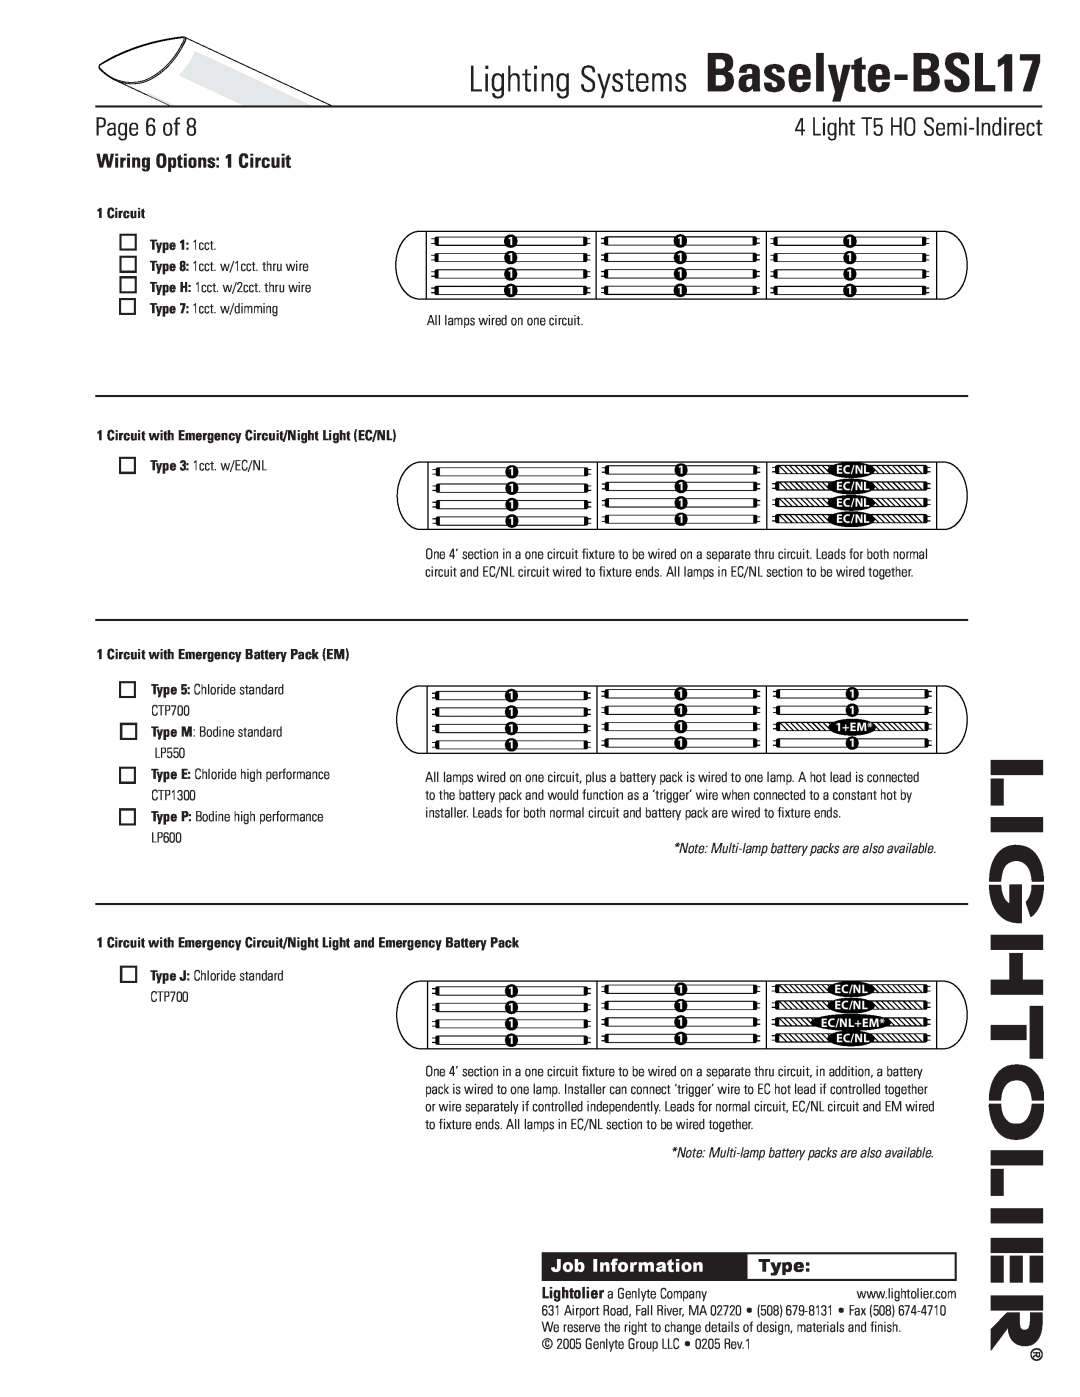 Lightolier Baselyte-BSL17 Wiring Options 1 Circuit, Circuit Type 1 1cct, Circuit with Emergency Battery Pack EM, Page of 